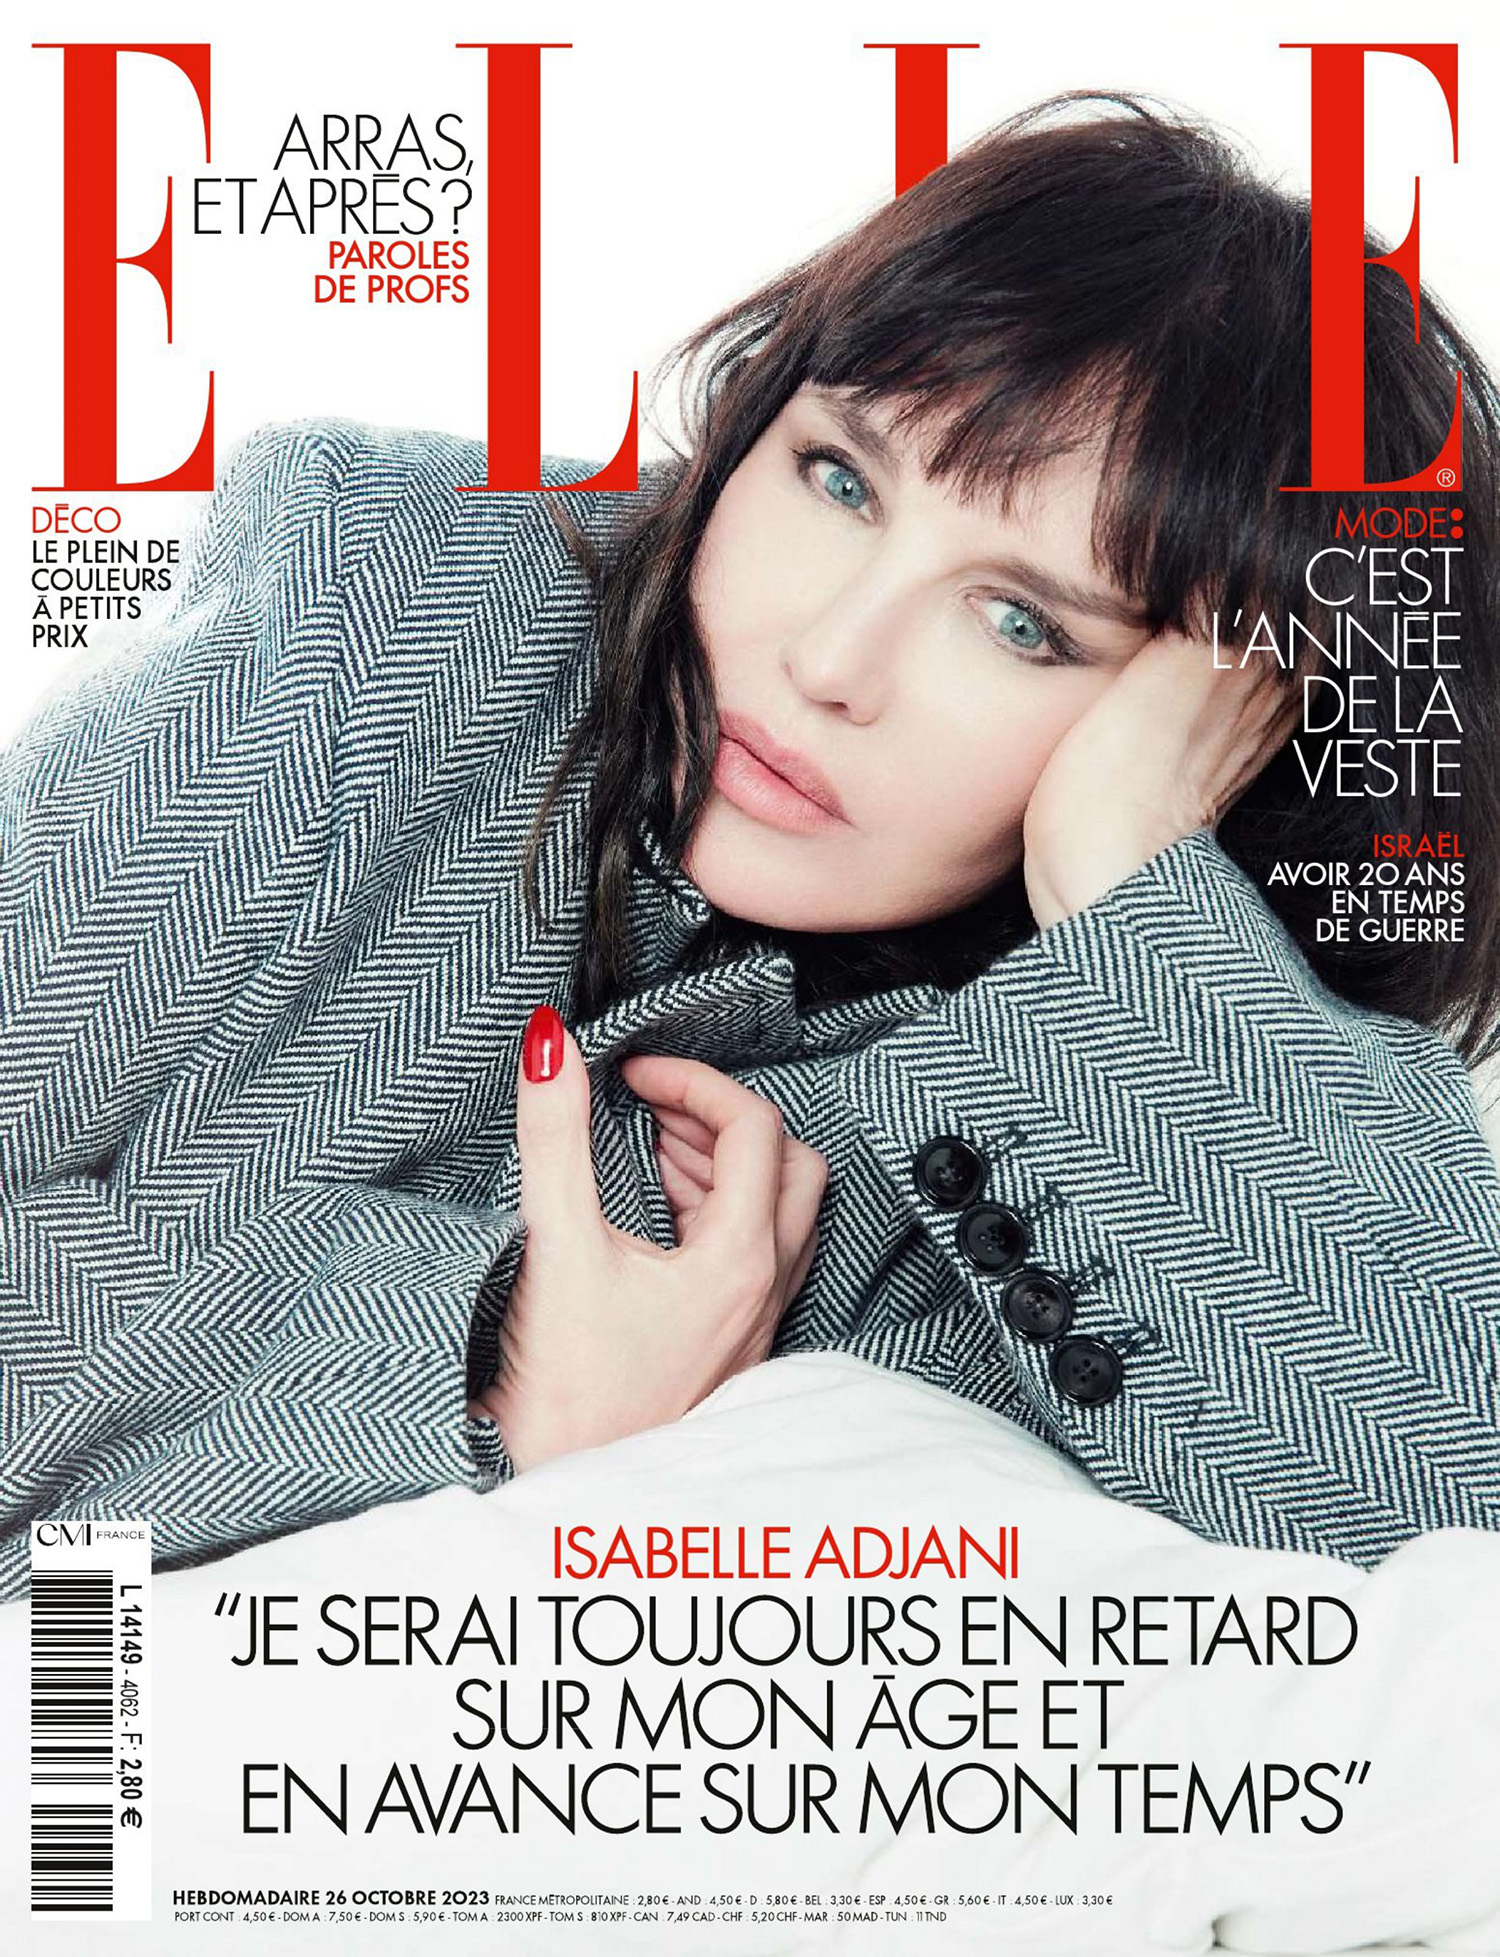 Isabelle Adjani covers Elle France October 26th, 2023 by Sofia Sanchez & Mauro Mongiello